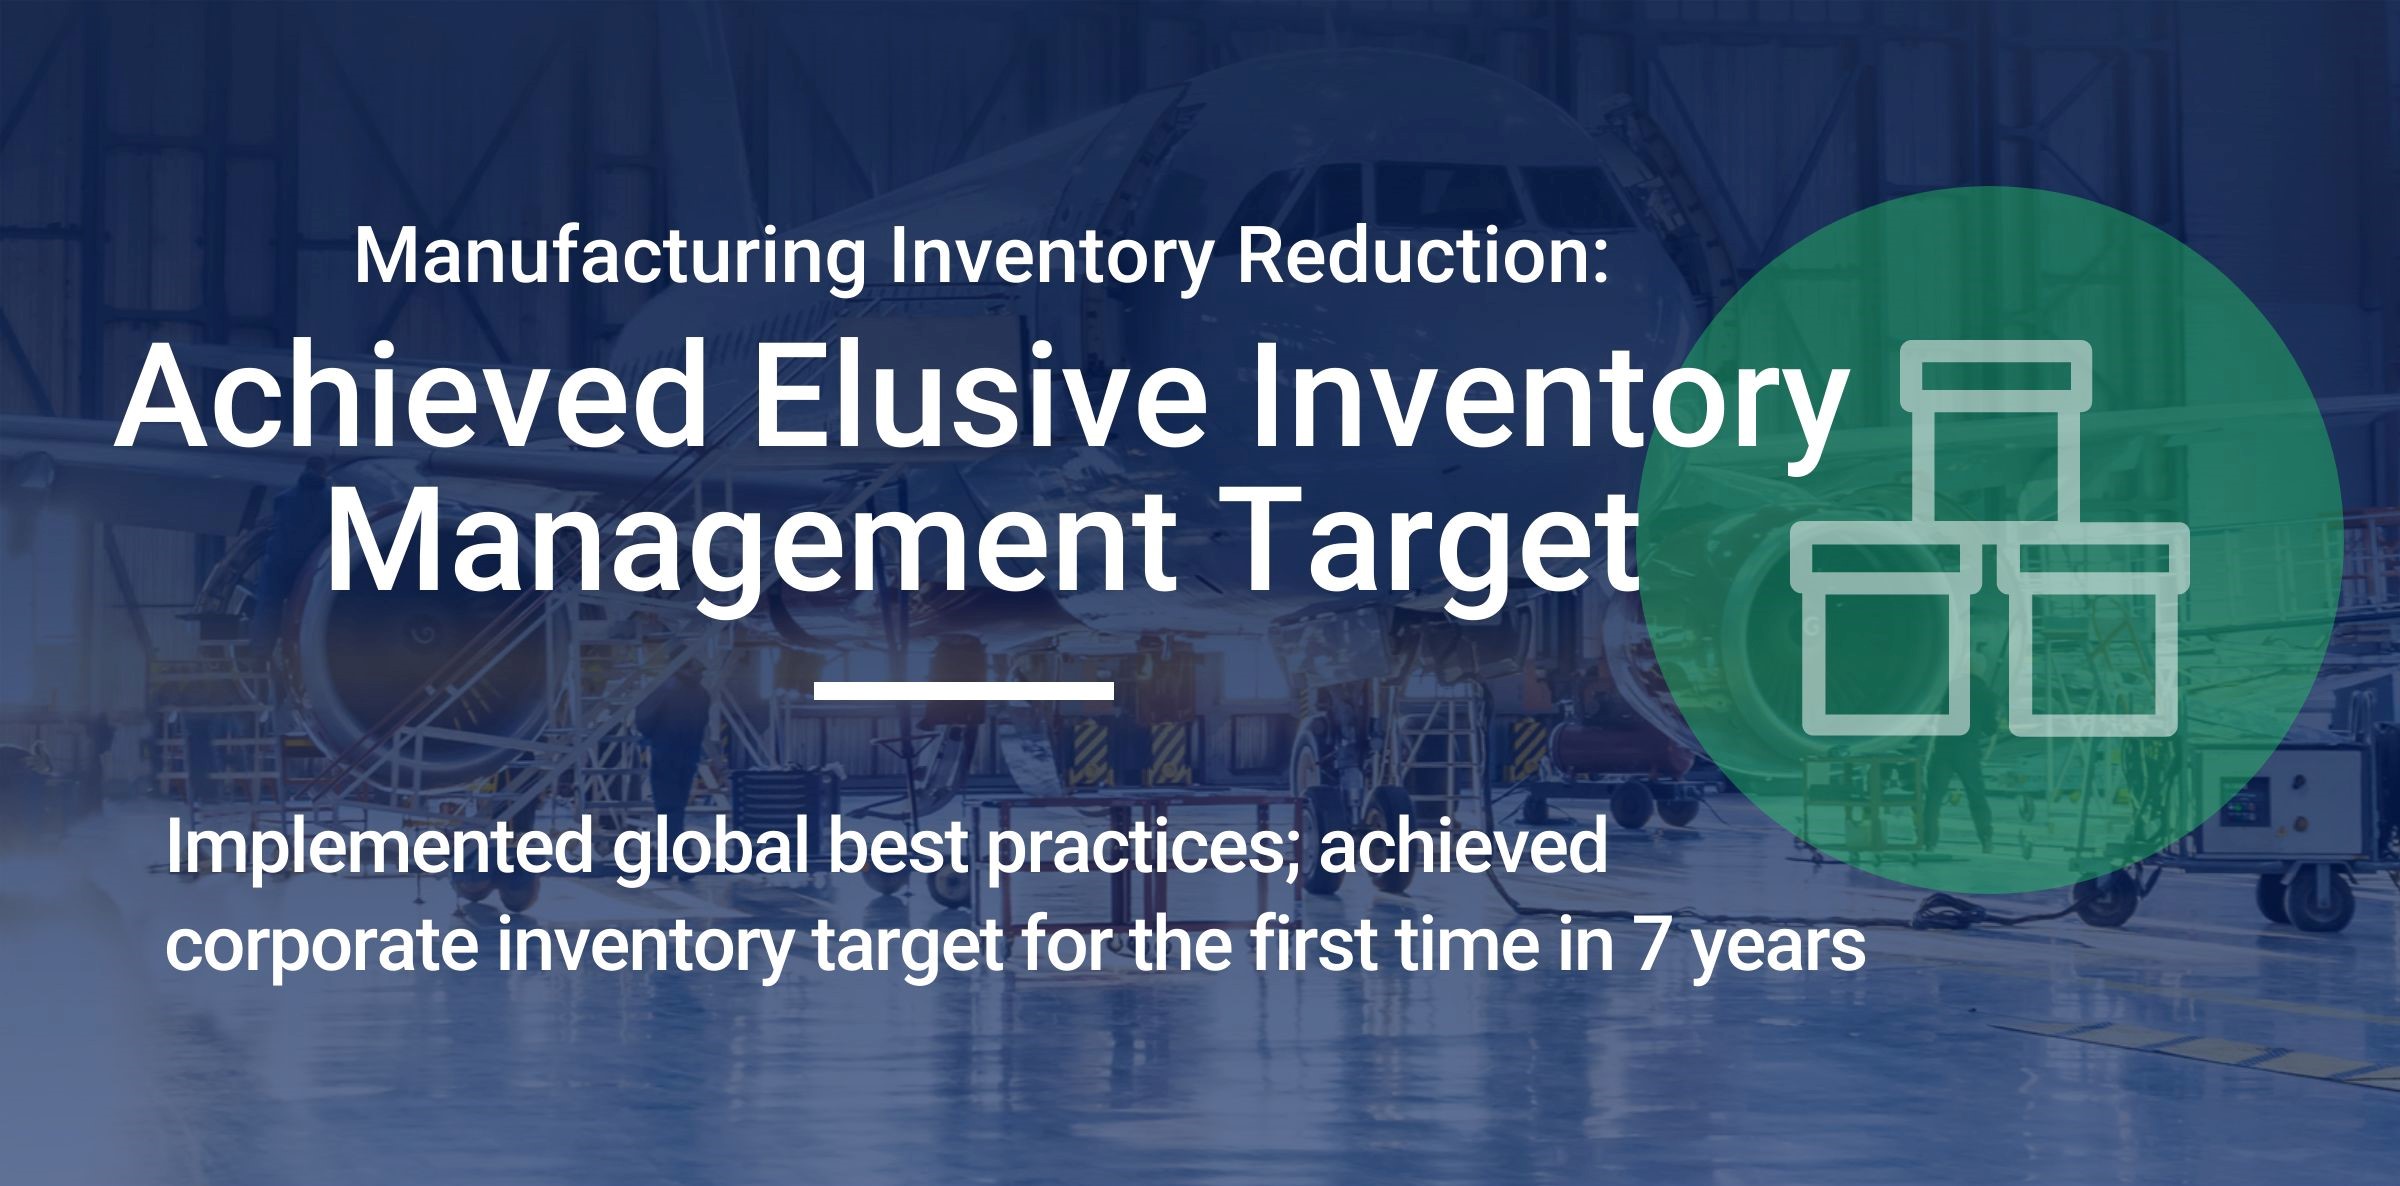 Manufacturing Inventory Reduction: Achieved Elusive Inventory Management Target Implemented global best practices; achieved corporate inventory target for the first time in 7 years.